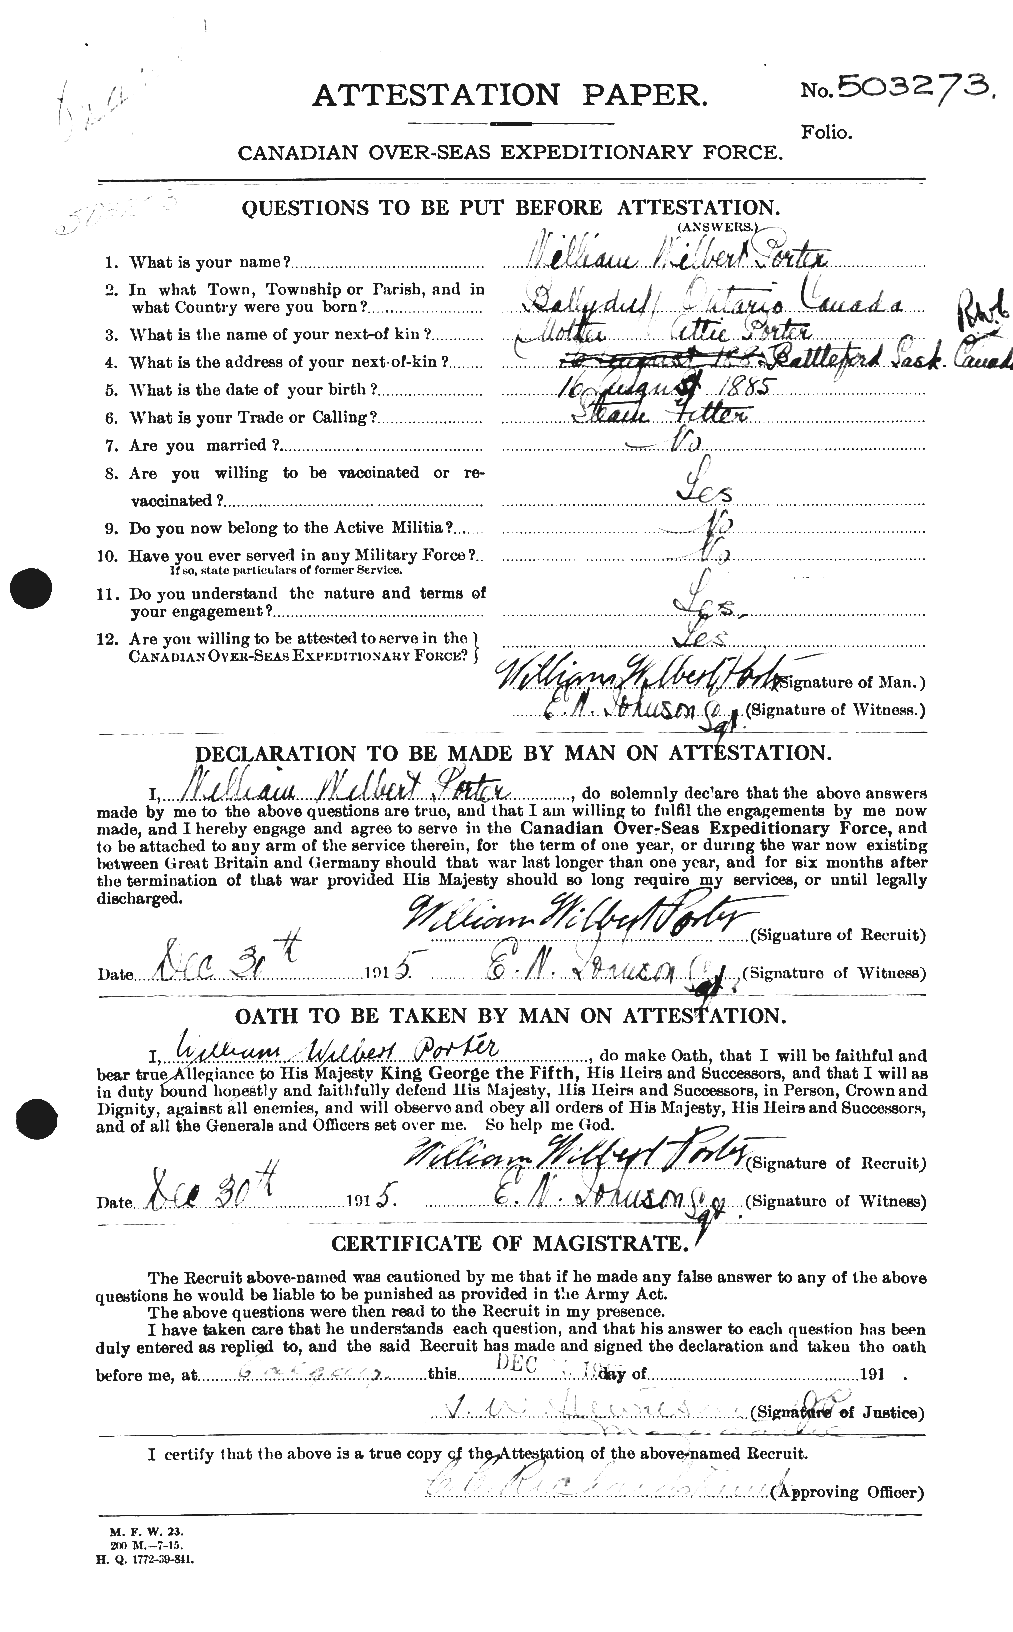 Personnel Records of the First World War - CEF 583914a